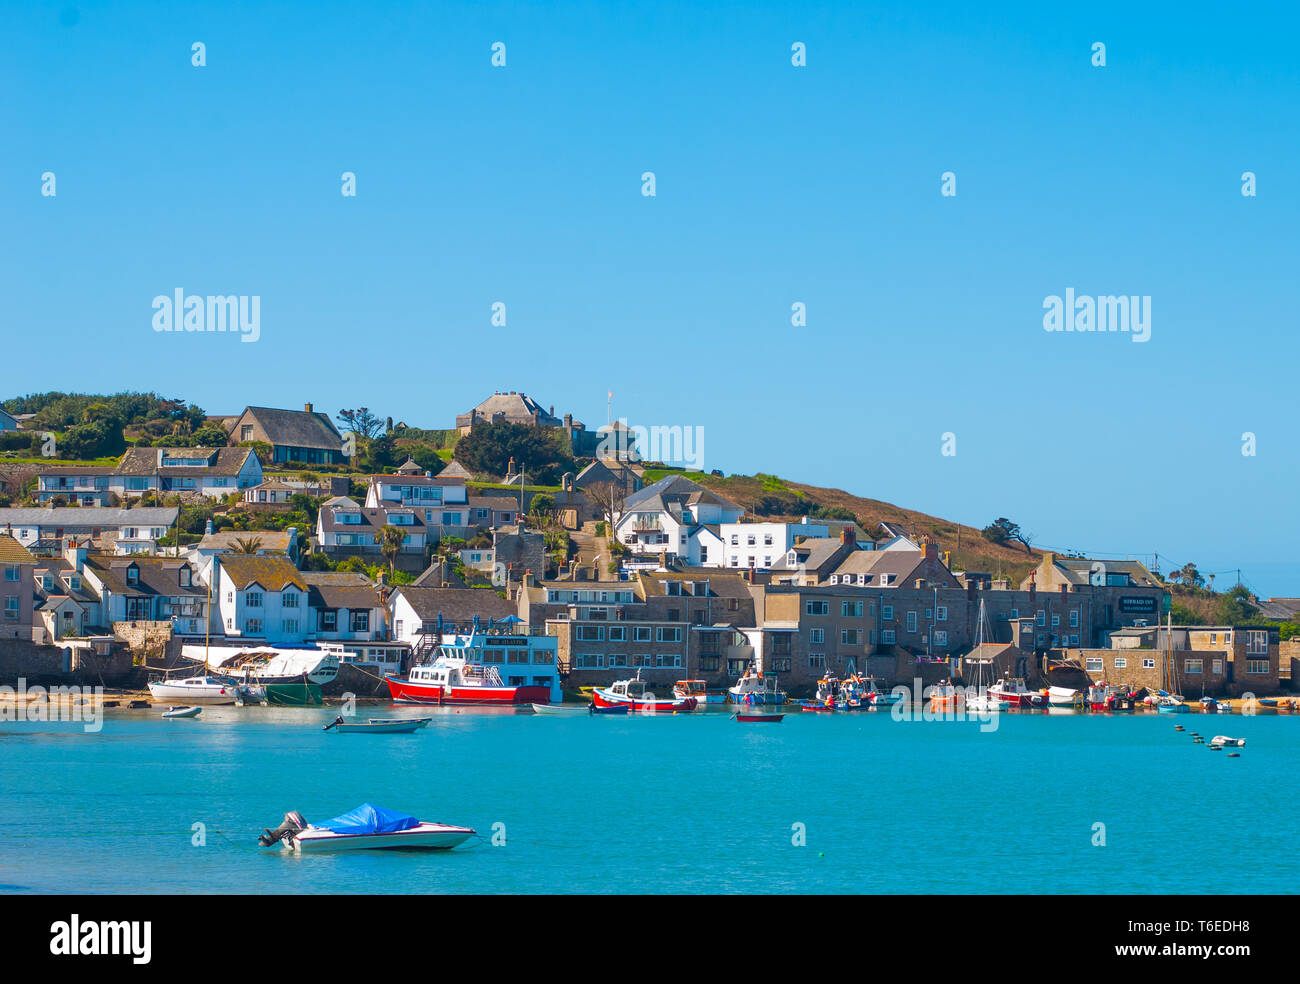 A beautiful summer's day on the Isles of Scilly, this is St Mary's, the main harbour. Stock Photo